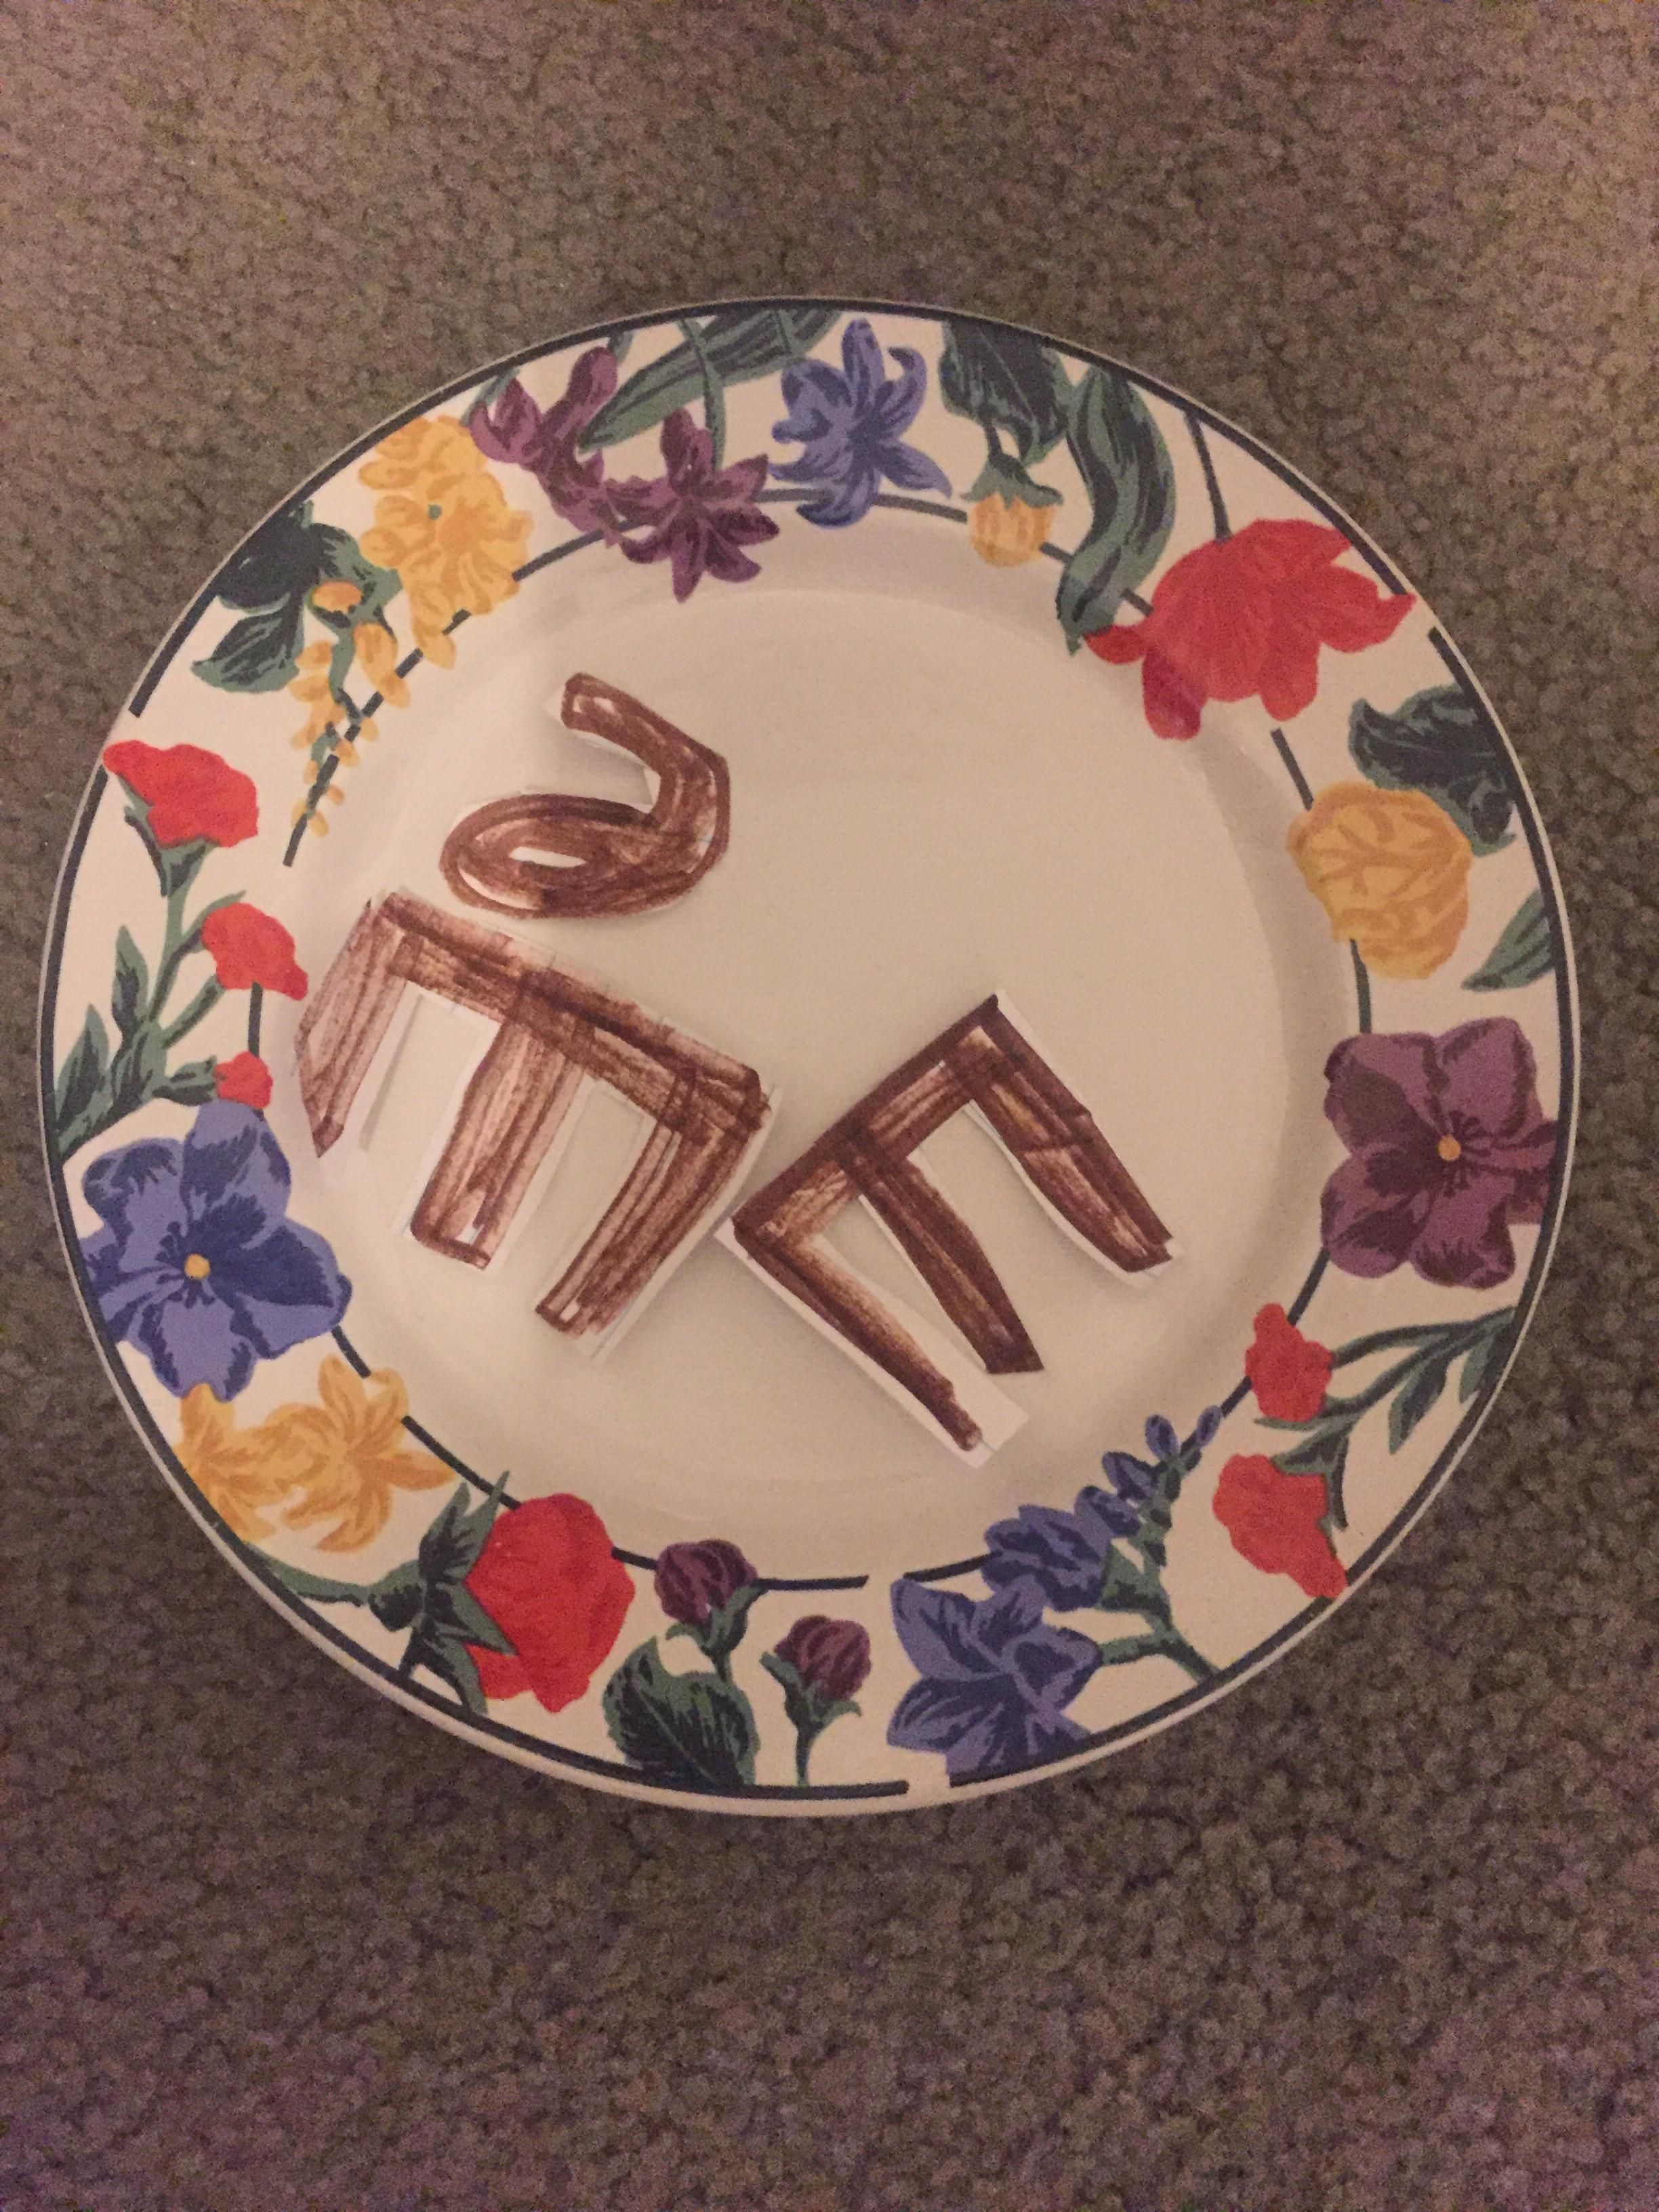 My son made me brownies for Easter.